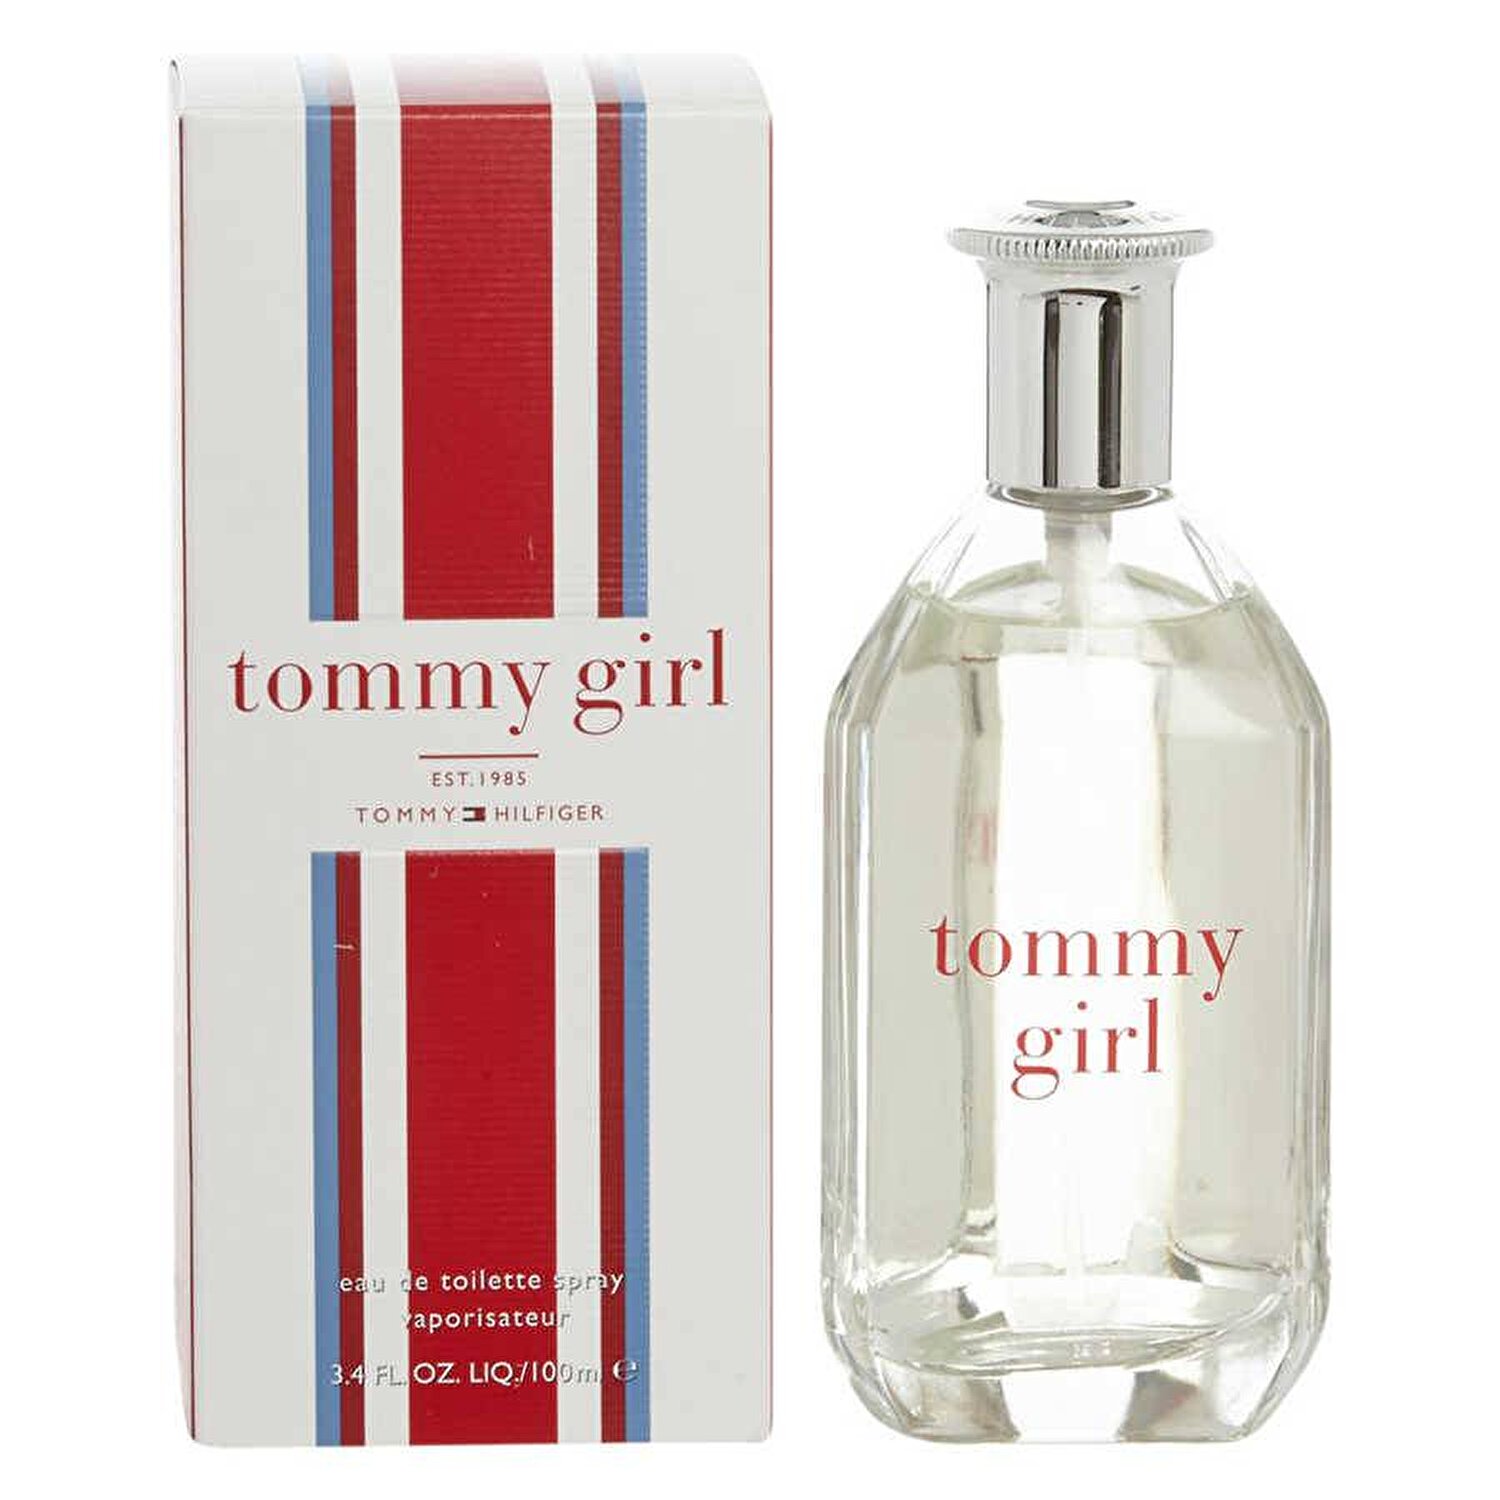 TOMMY GIRL 100ml EDT